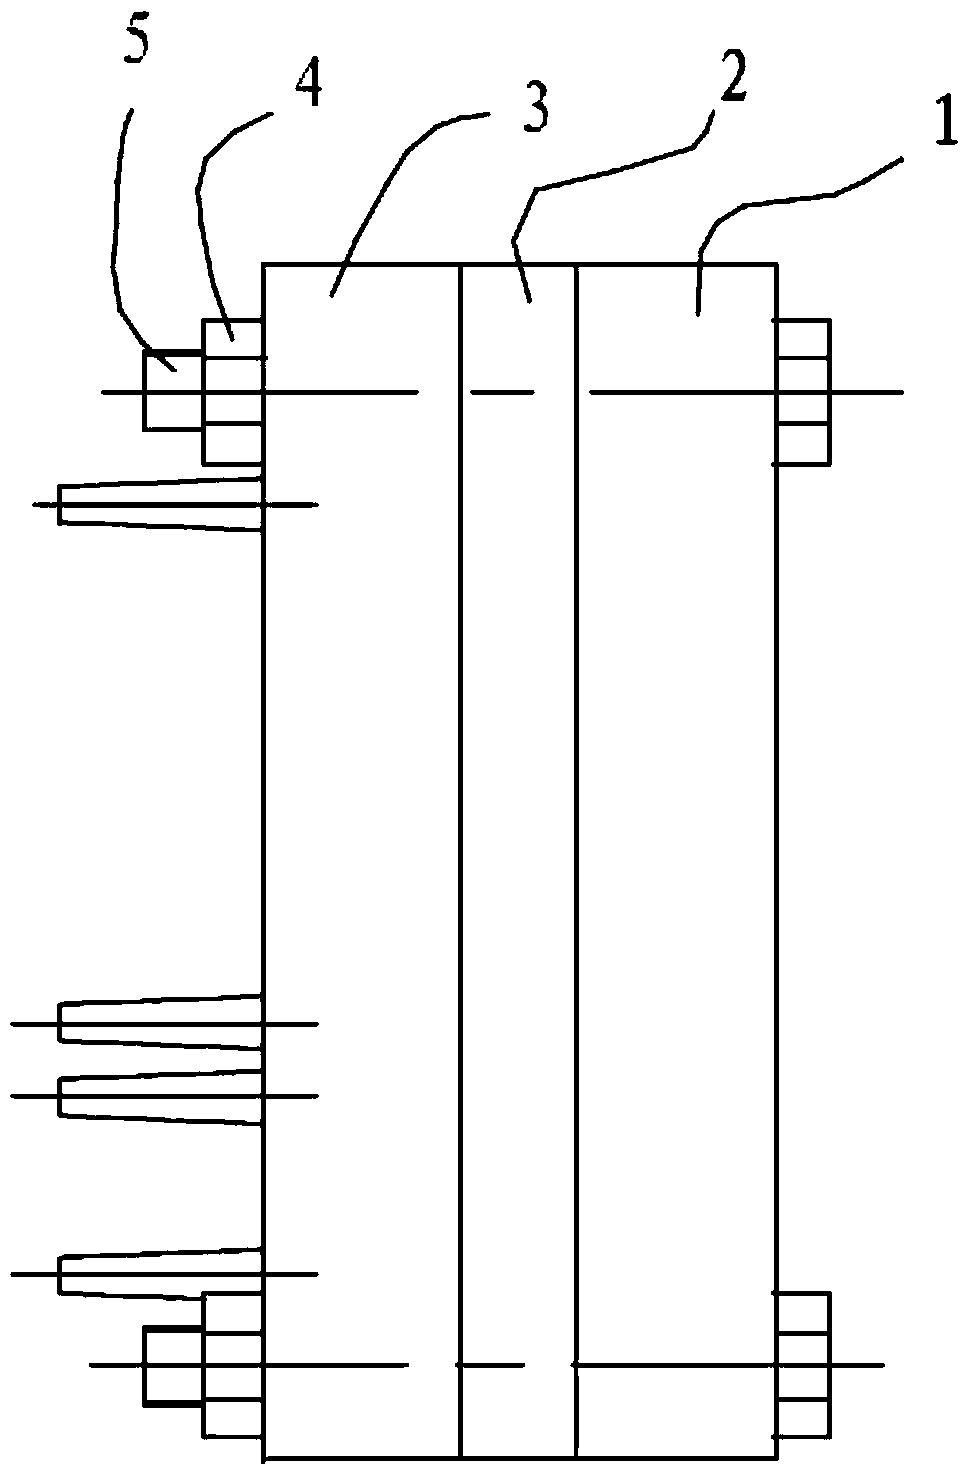 A Bistable Controller for Pneumatic Beam